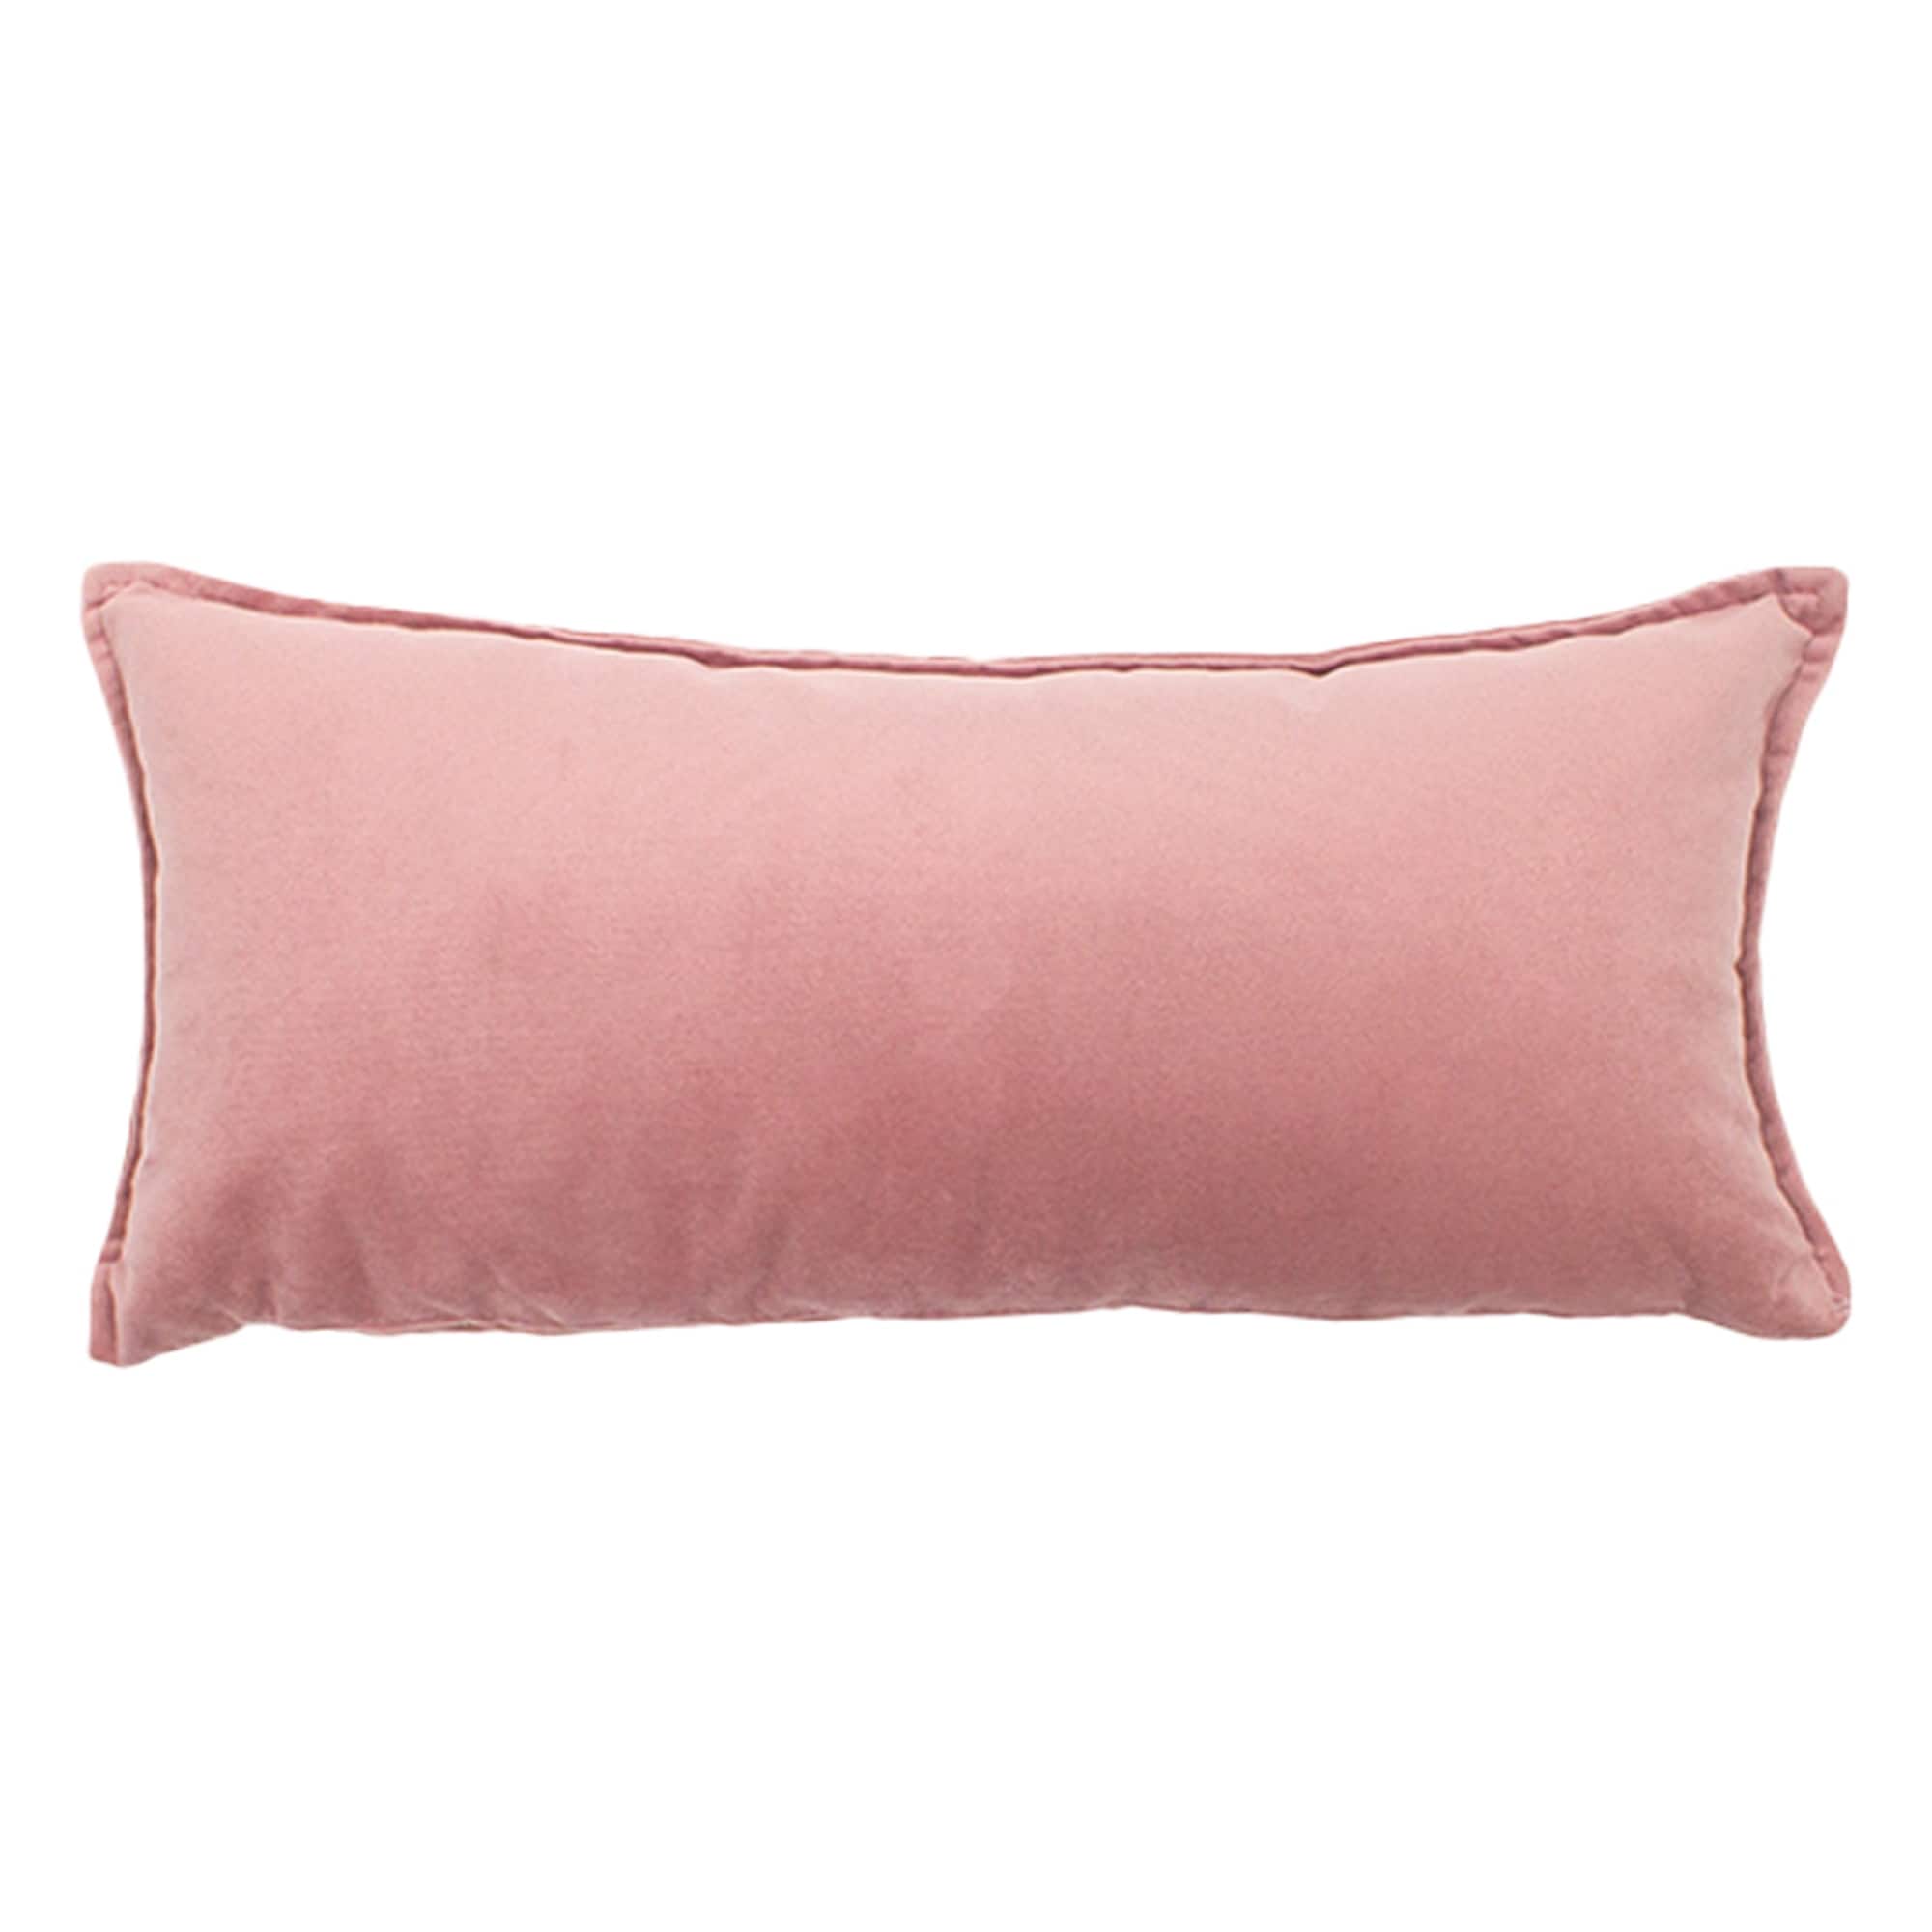 Small Throw Pillows For Chair